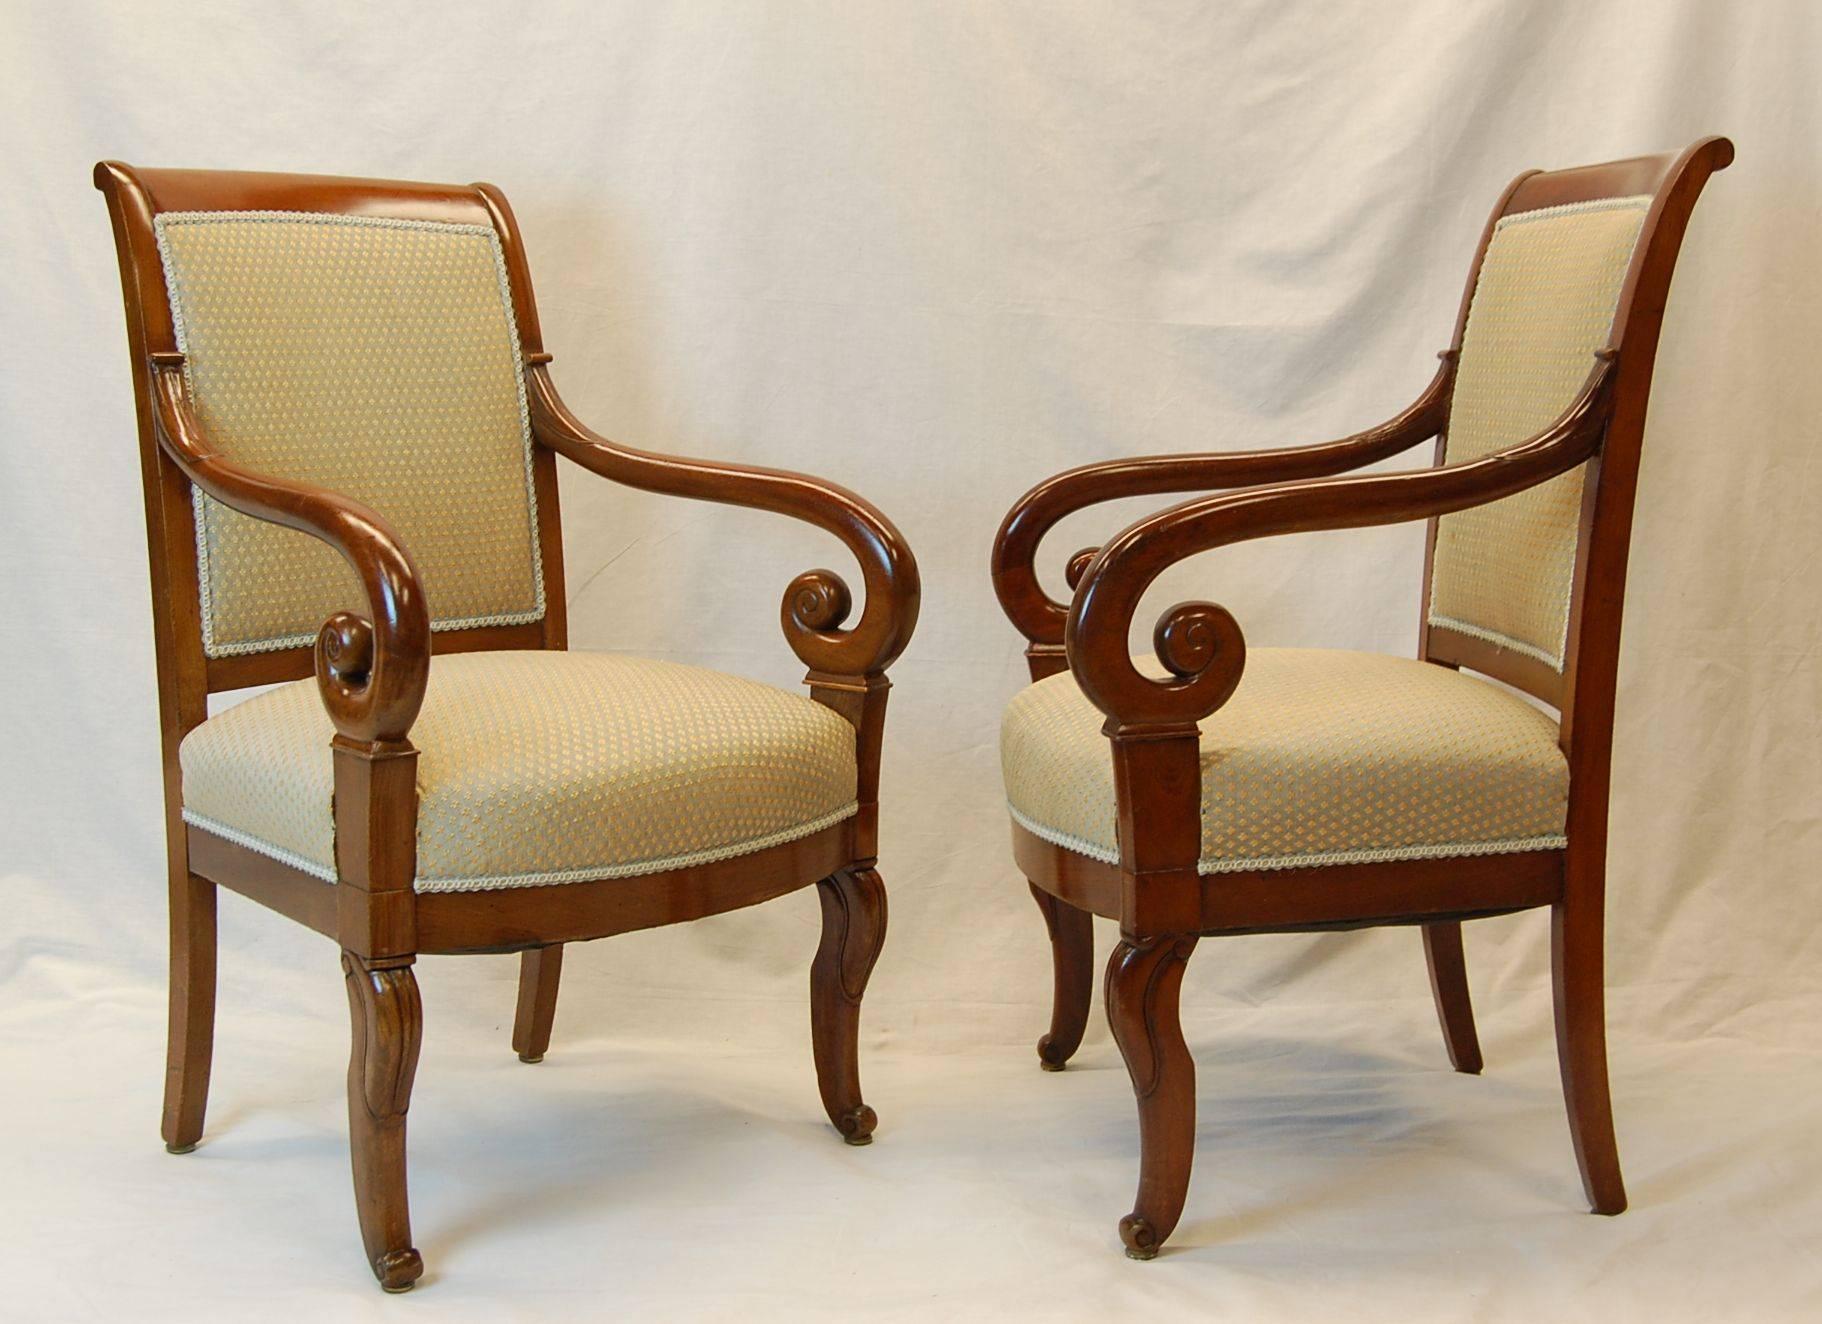 Hand-Carved Pair of Carved Mahogany Restauration Period Armchairs, Early 19th Century For Sale